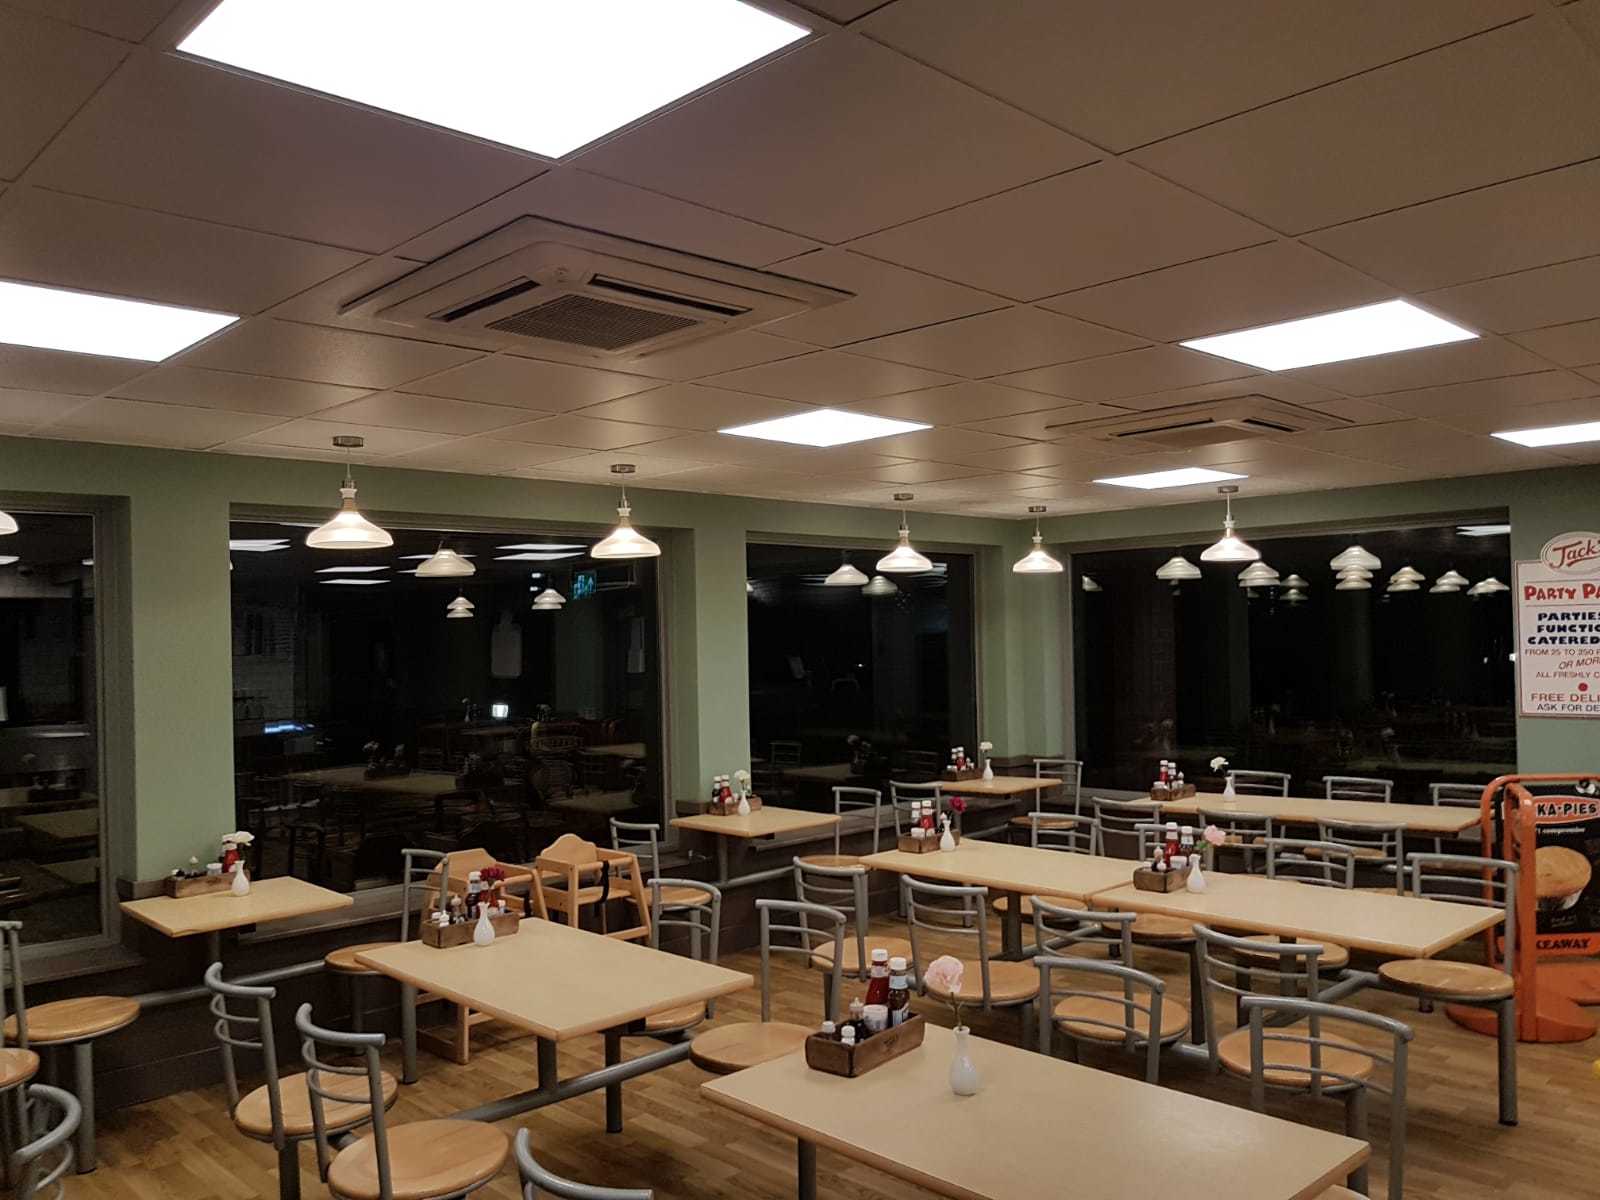 Replacing fluorescent lights with new LED ceiling panel lights